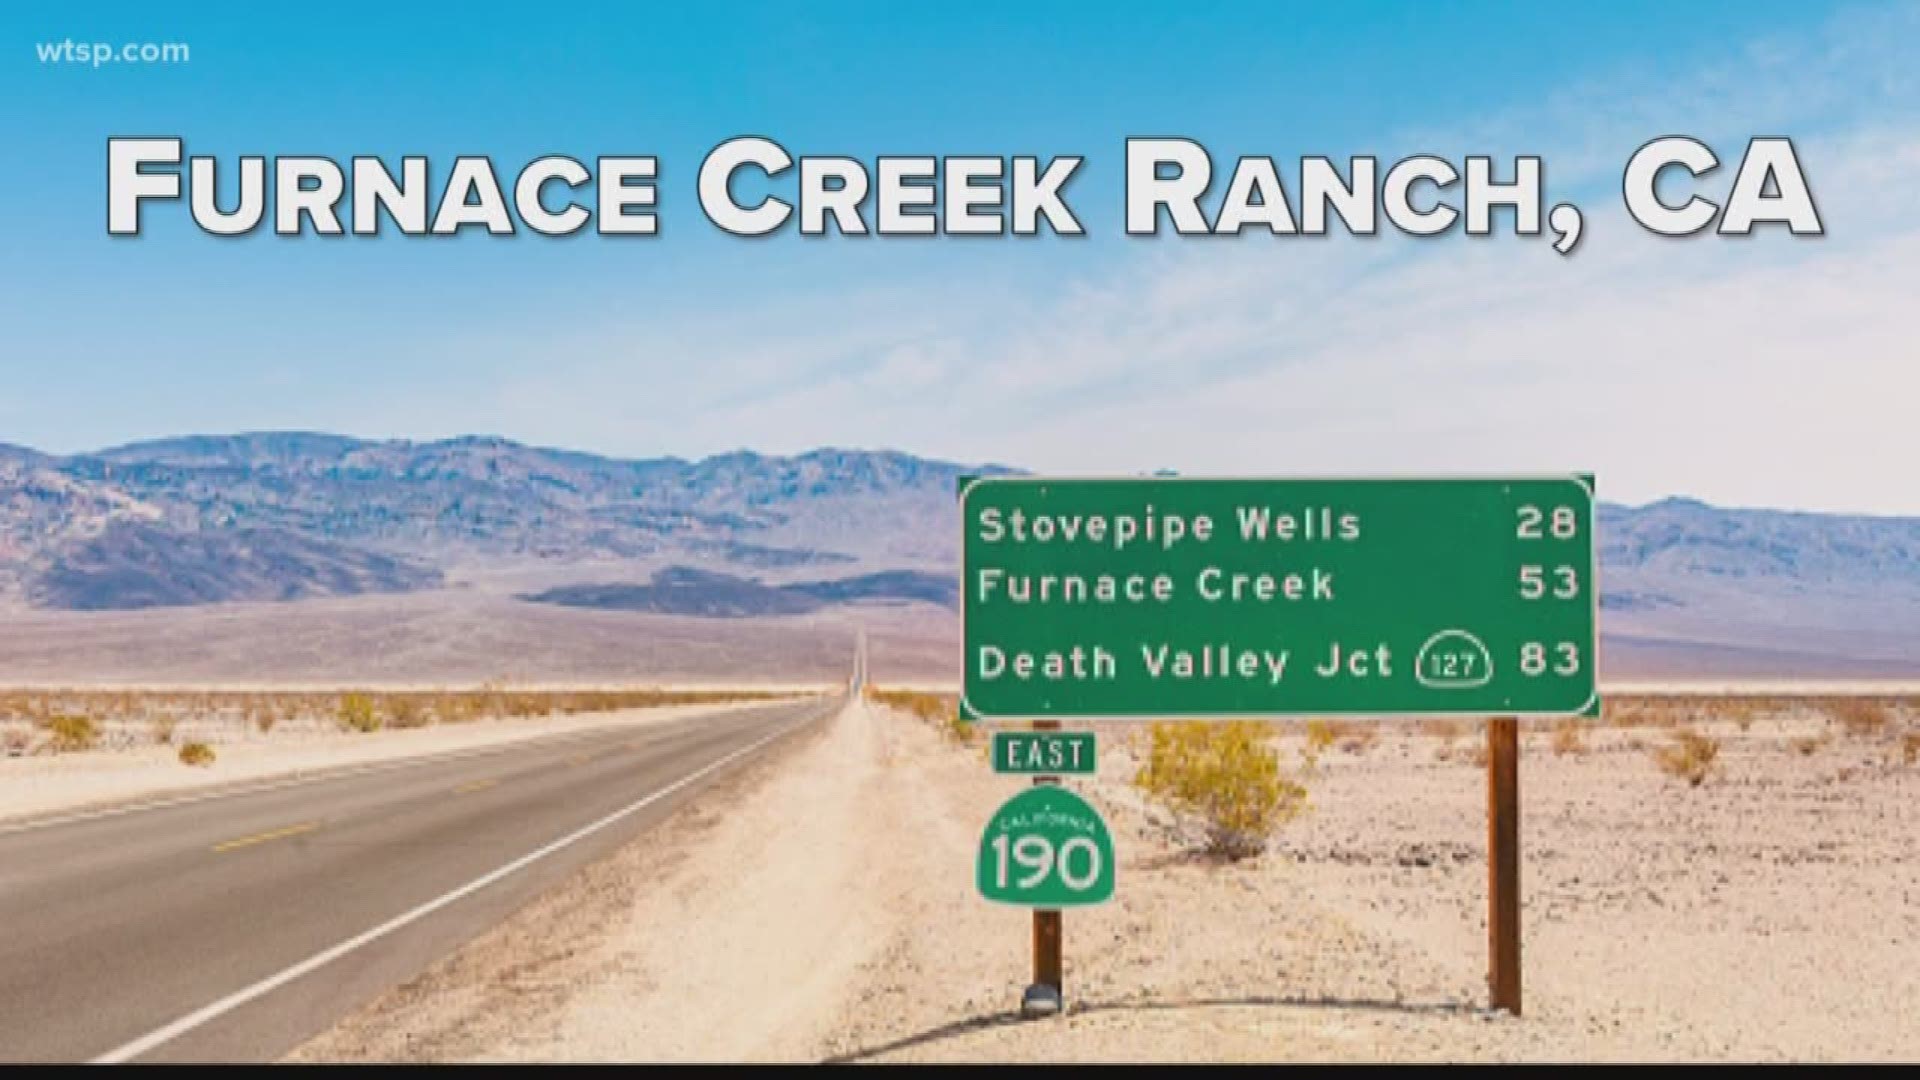 Furnace Creek Ranch, California, is where the hottest air temperature was ever recorded. It was 134 degrees Fahrenheit in 1913.